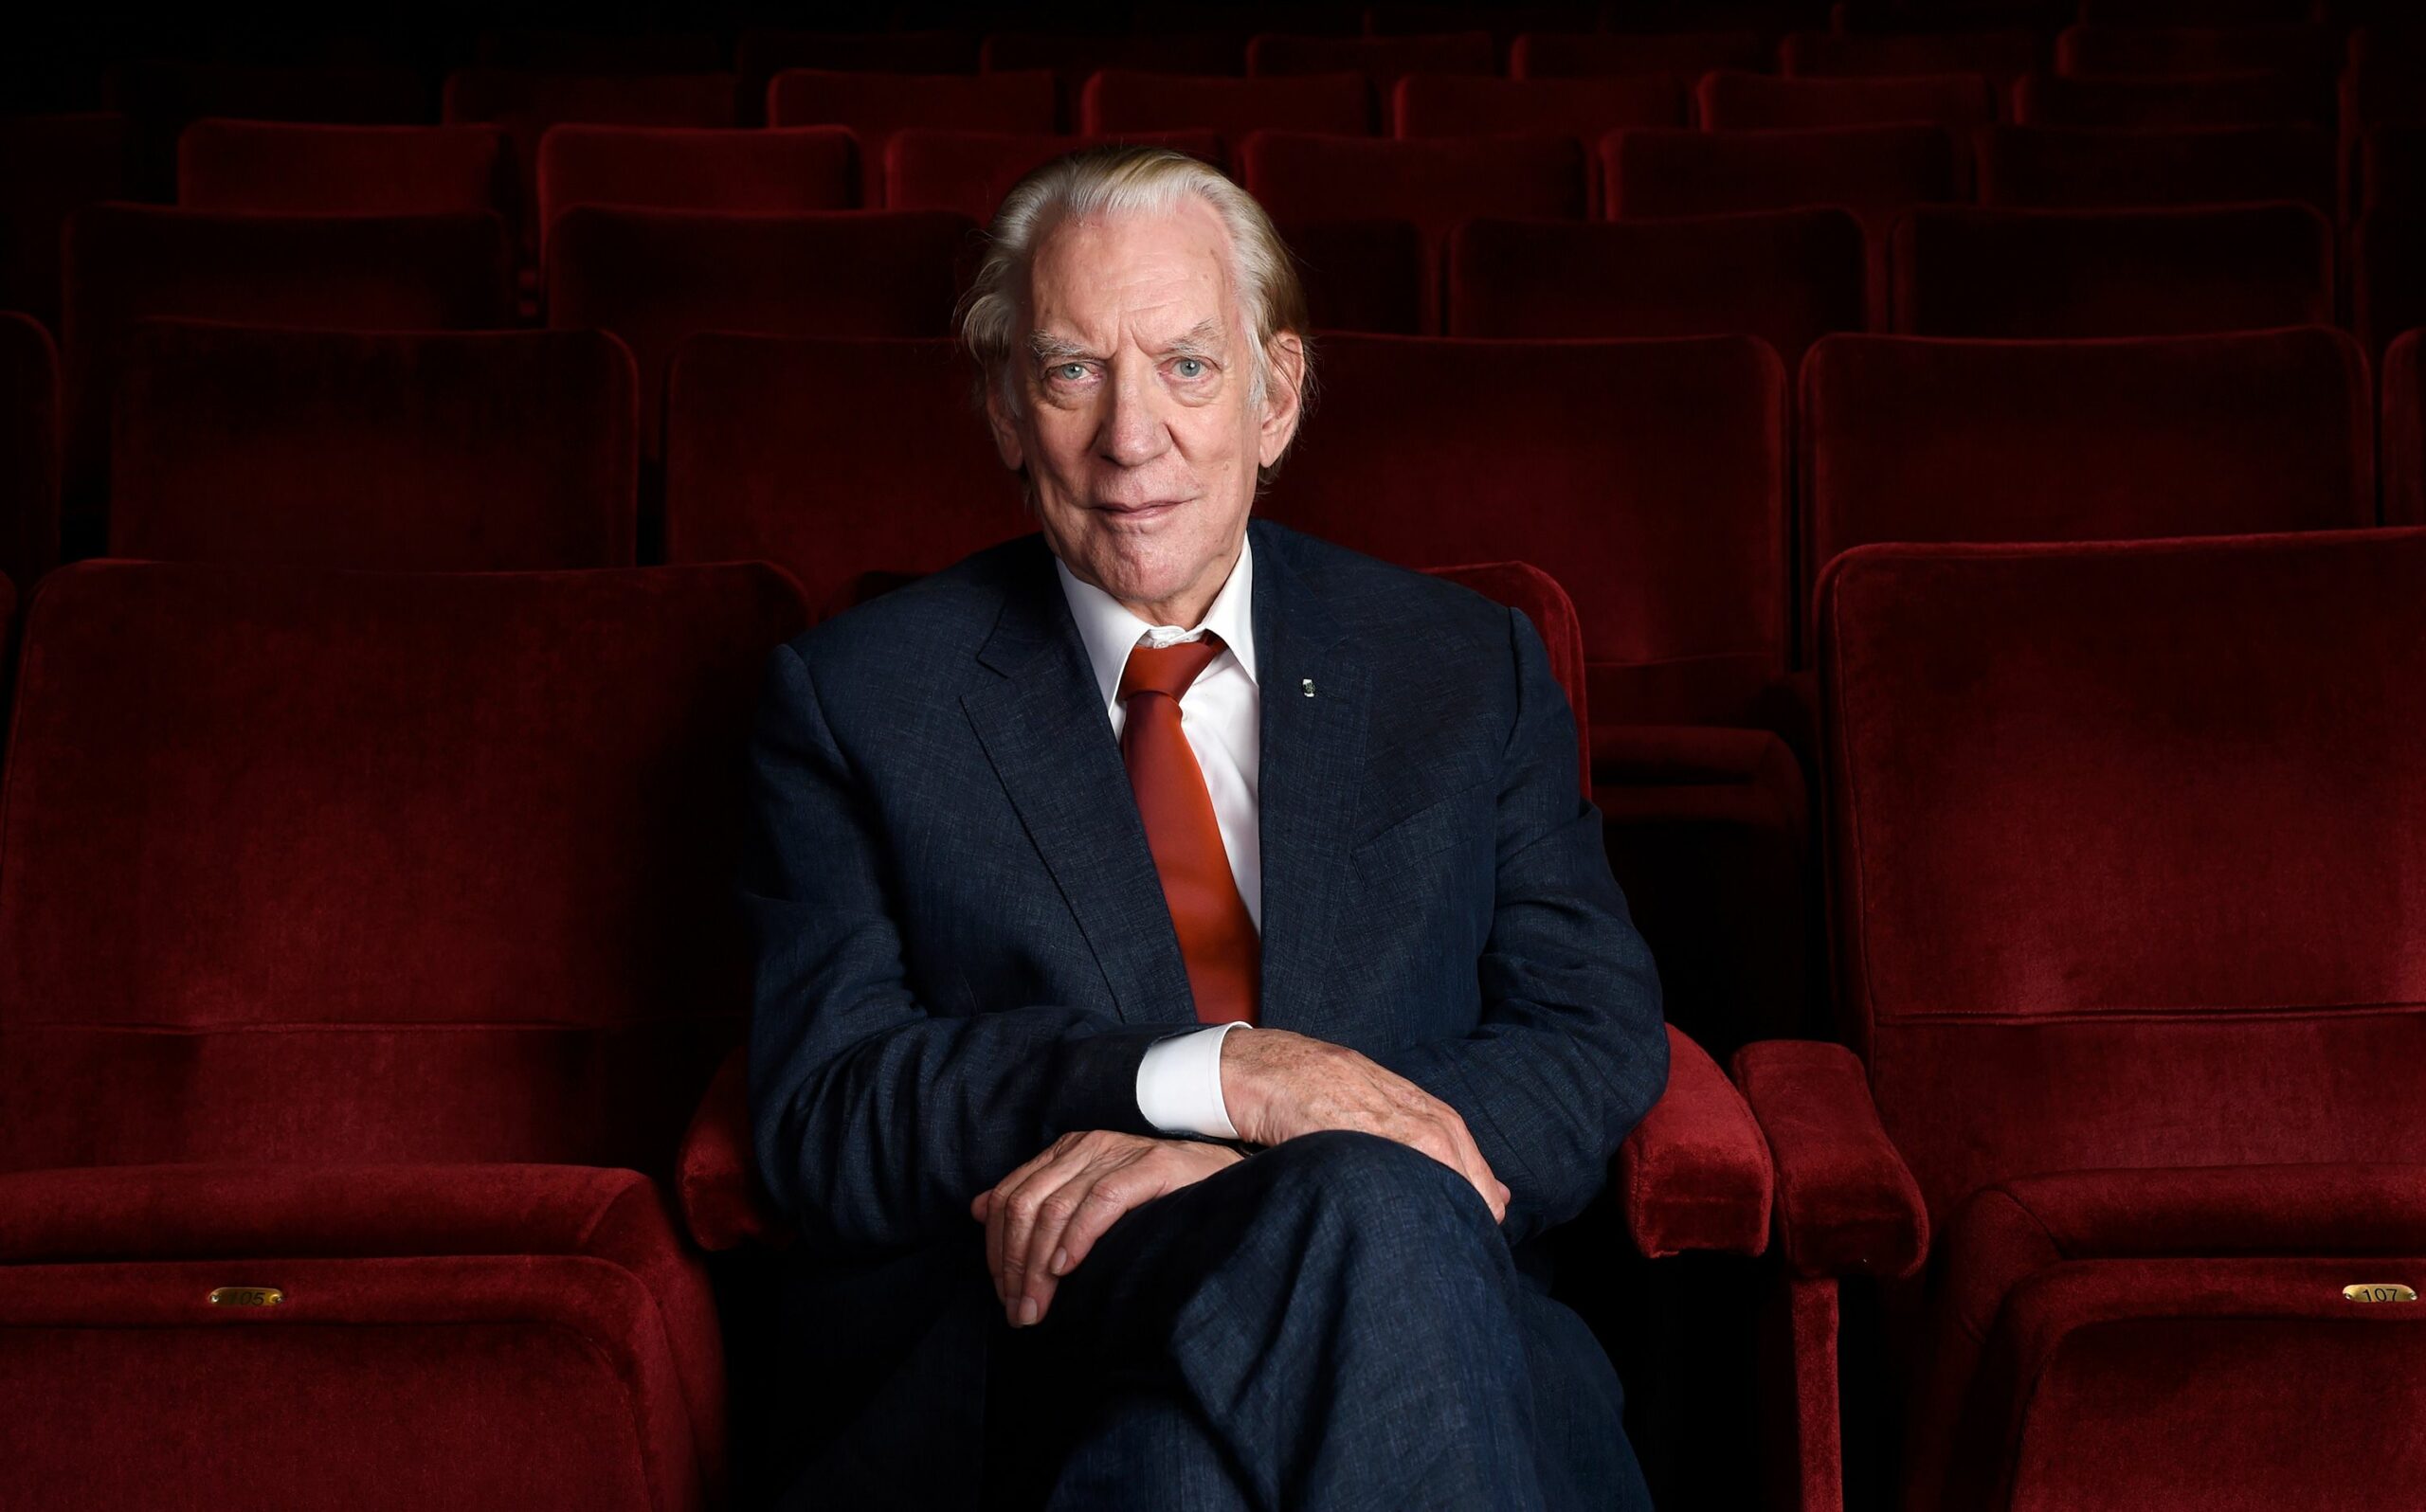 Legendary Actor Donald Sutherland Passes Away at 88 After Long Illness